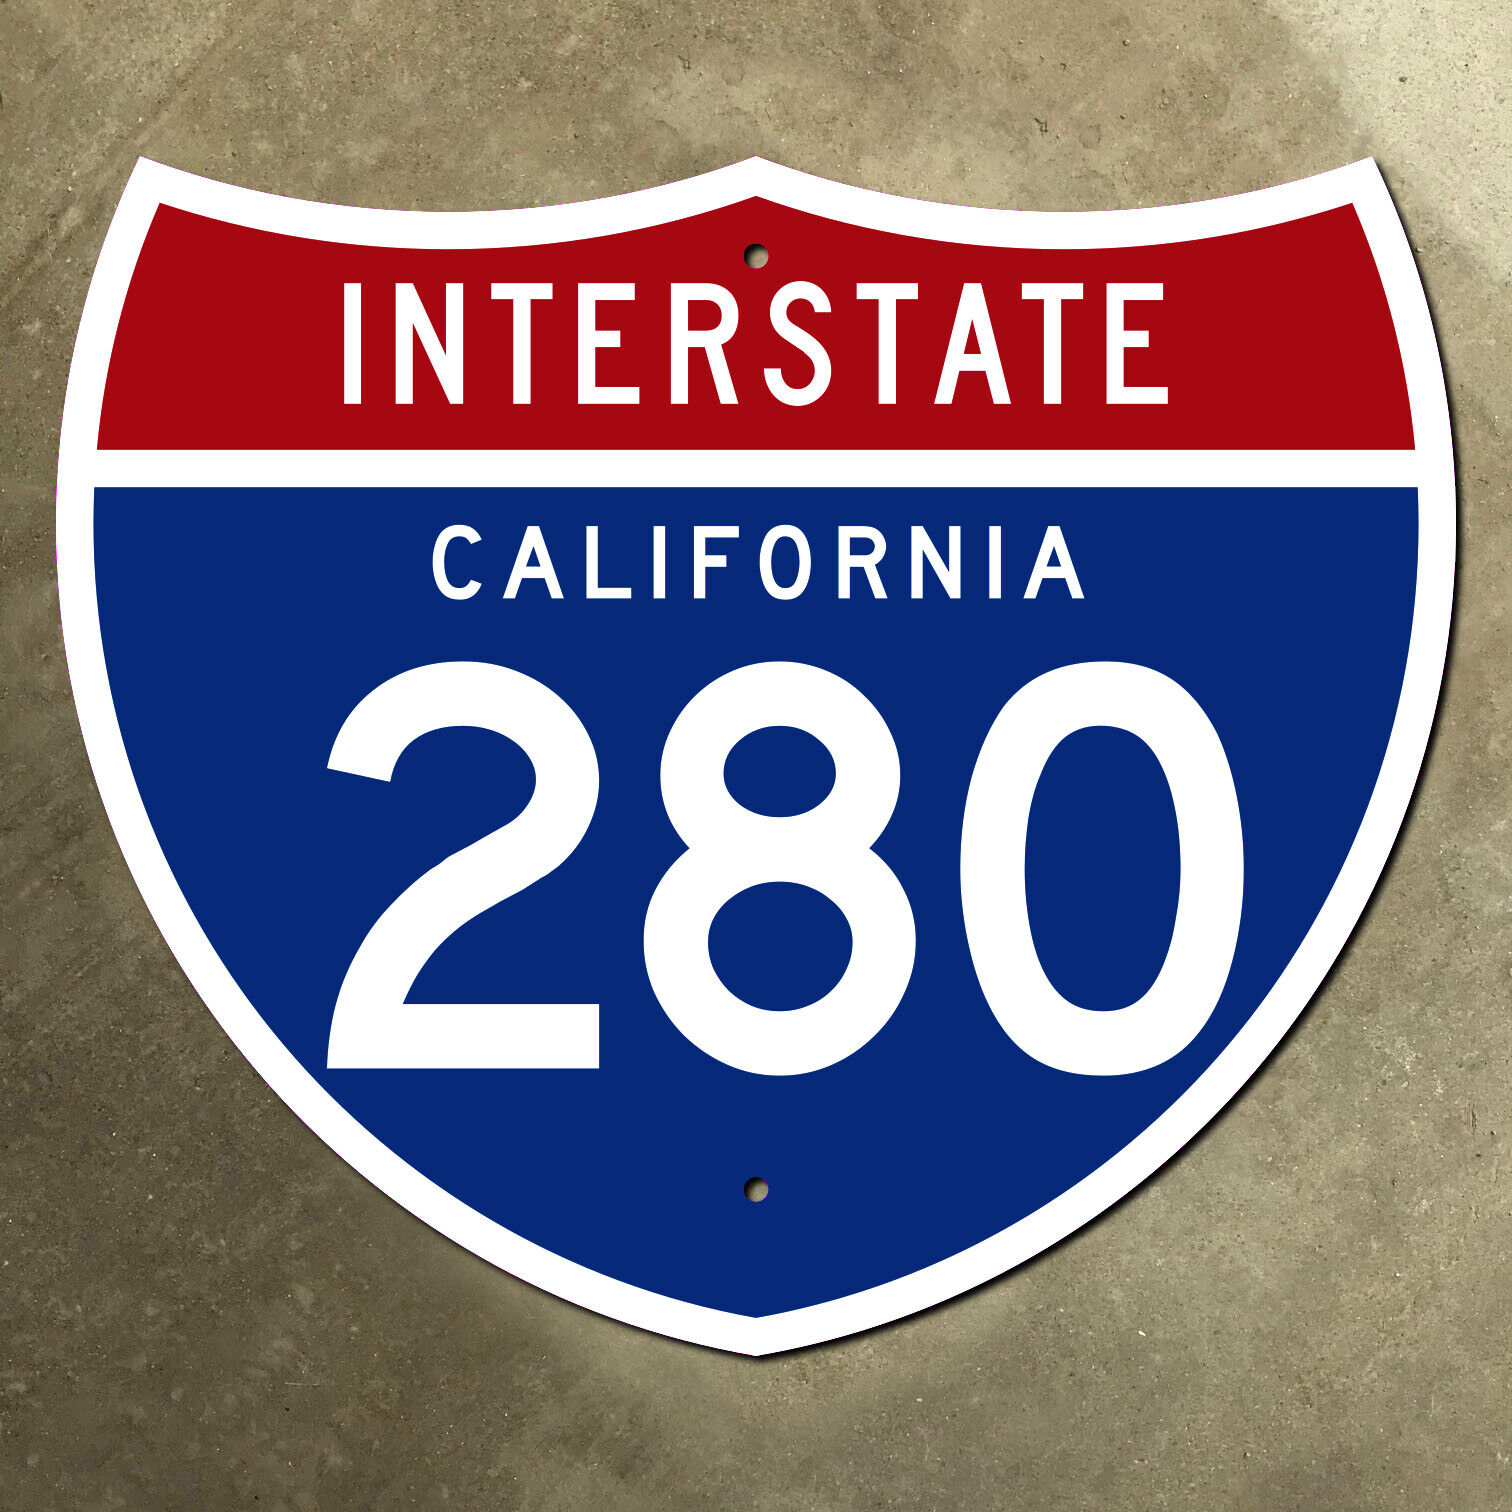 California interstate route 280 highway marker road sign 21